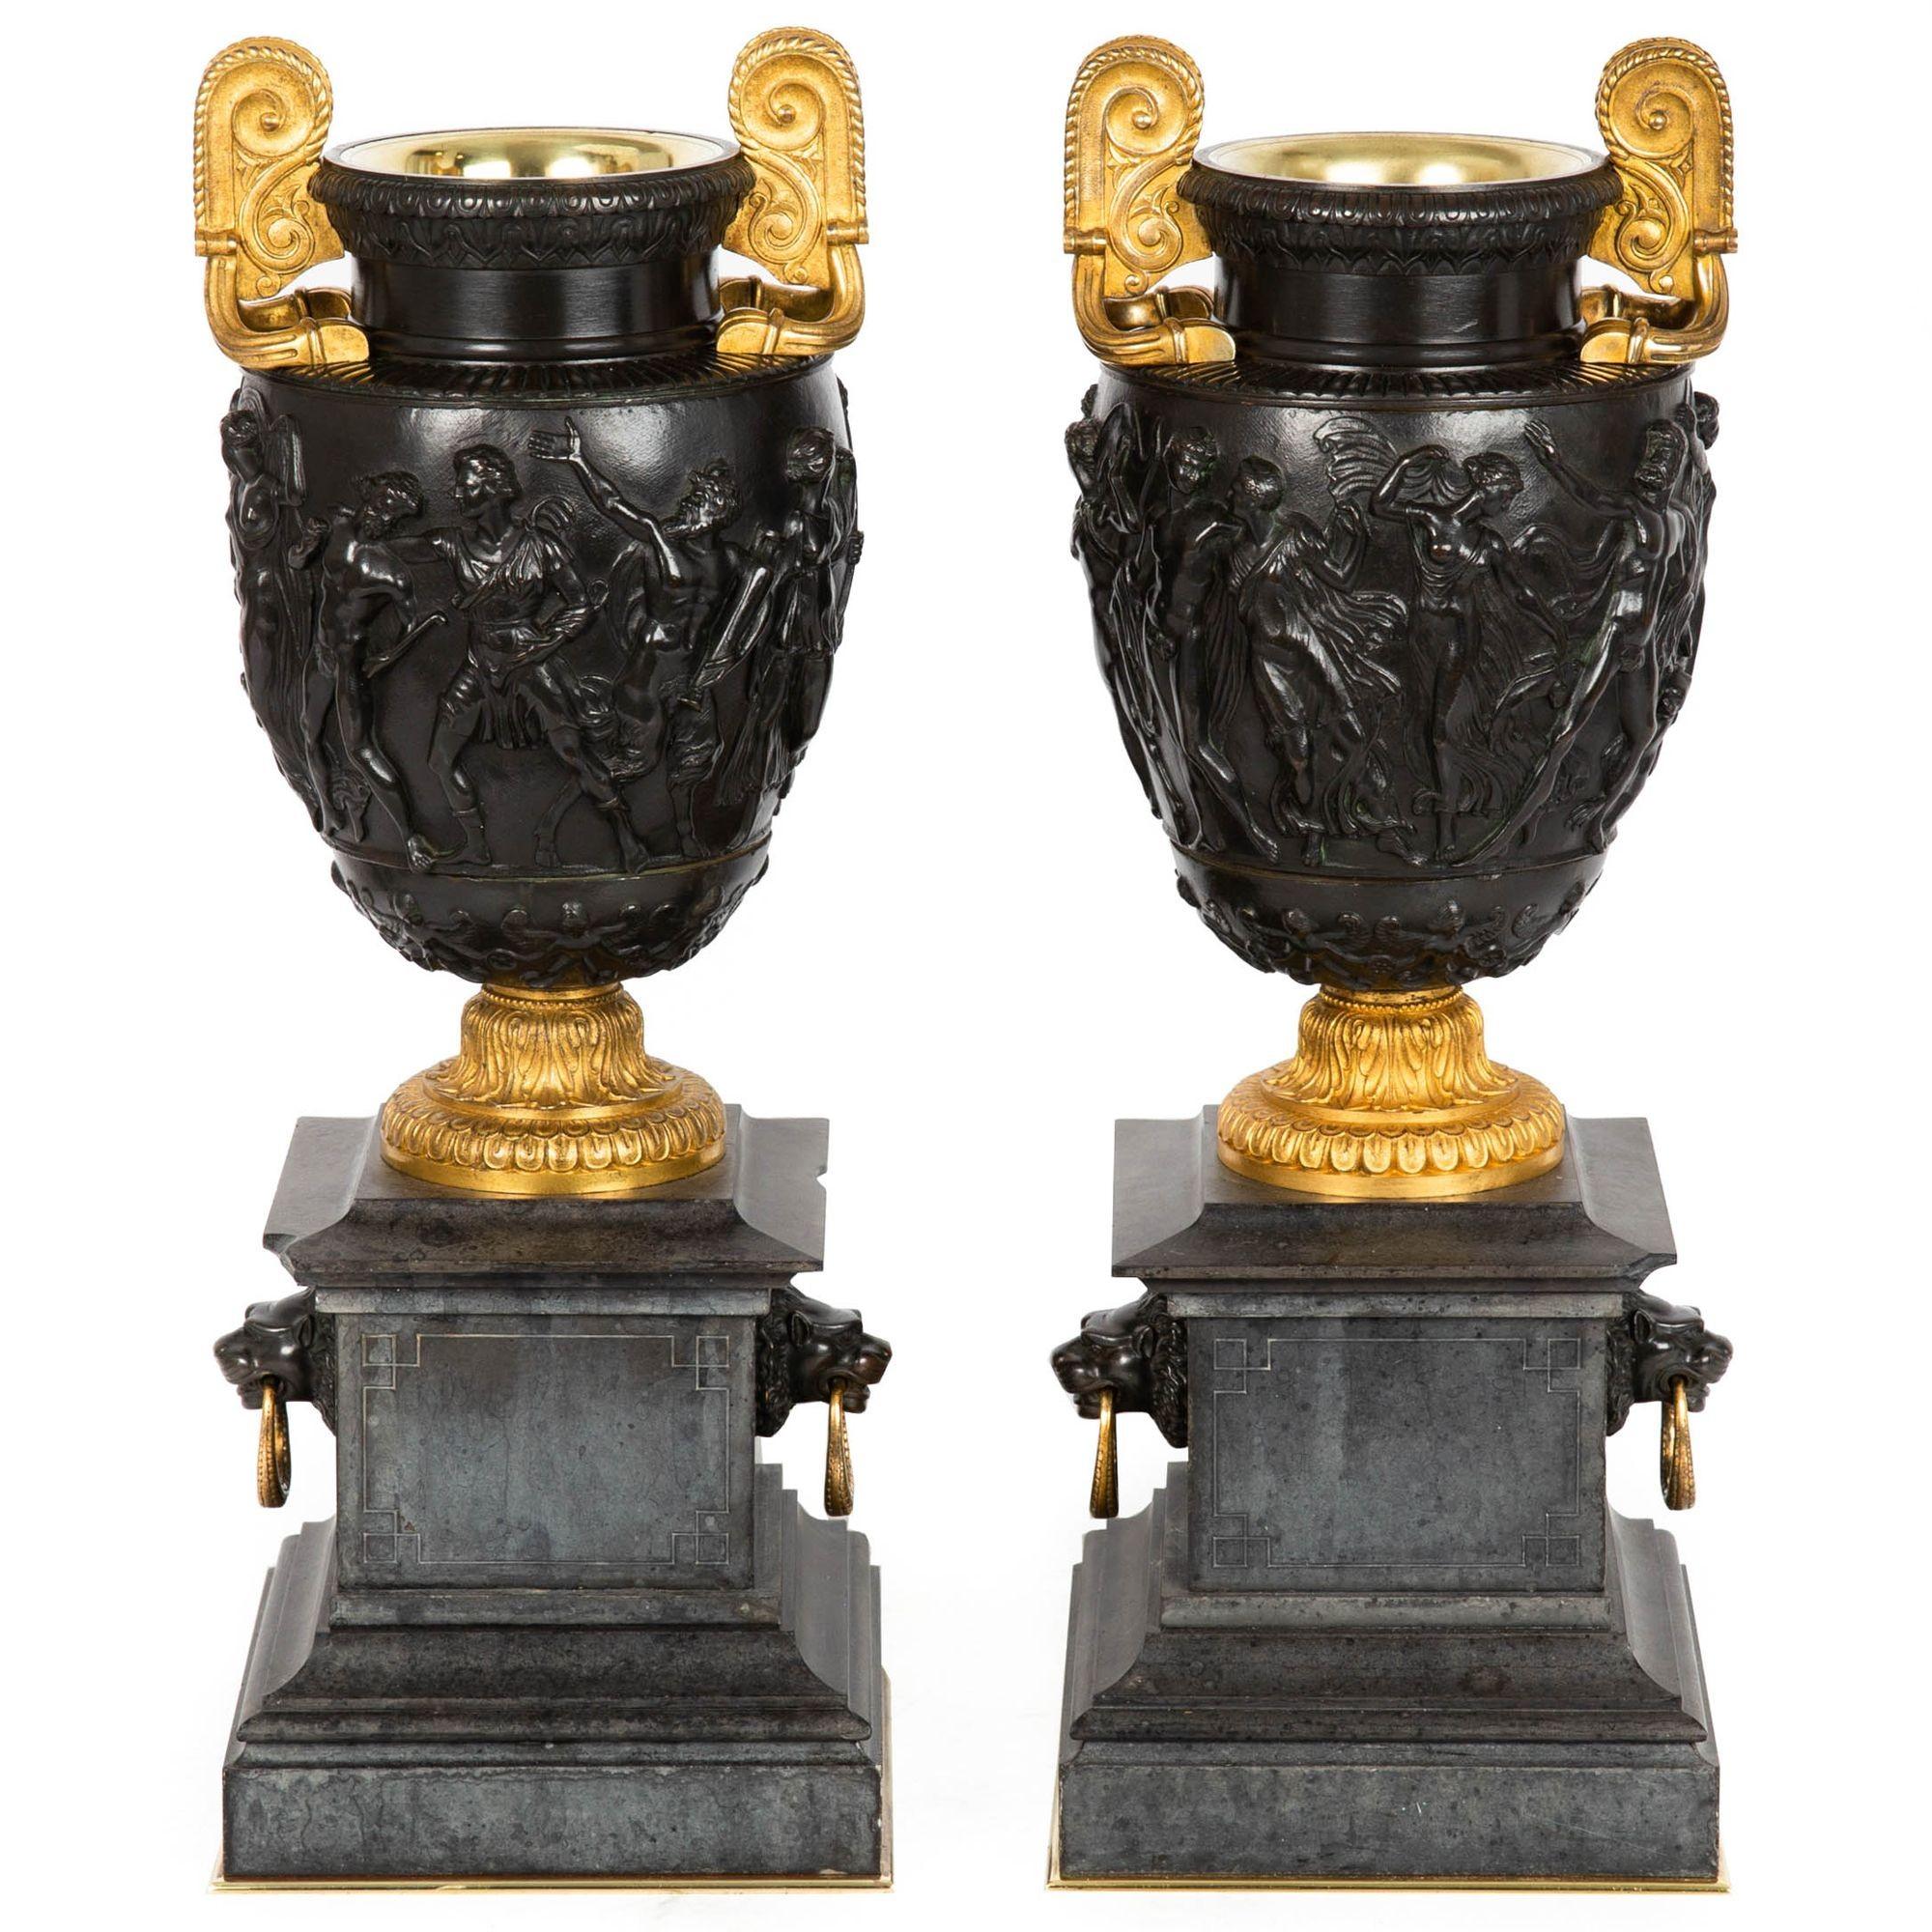 This very fine pair of gilt and patinated bronze vases are modeled after the Townley Vase. The 200 A.D. Roman copy of an earlier Greek example was discovered in 1773 by Gavin Hamilton and was owned by Charles Townley, from whom the name of the vase